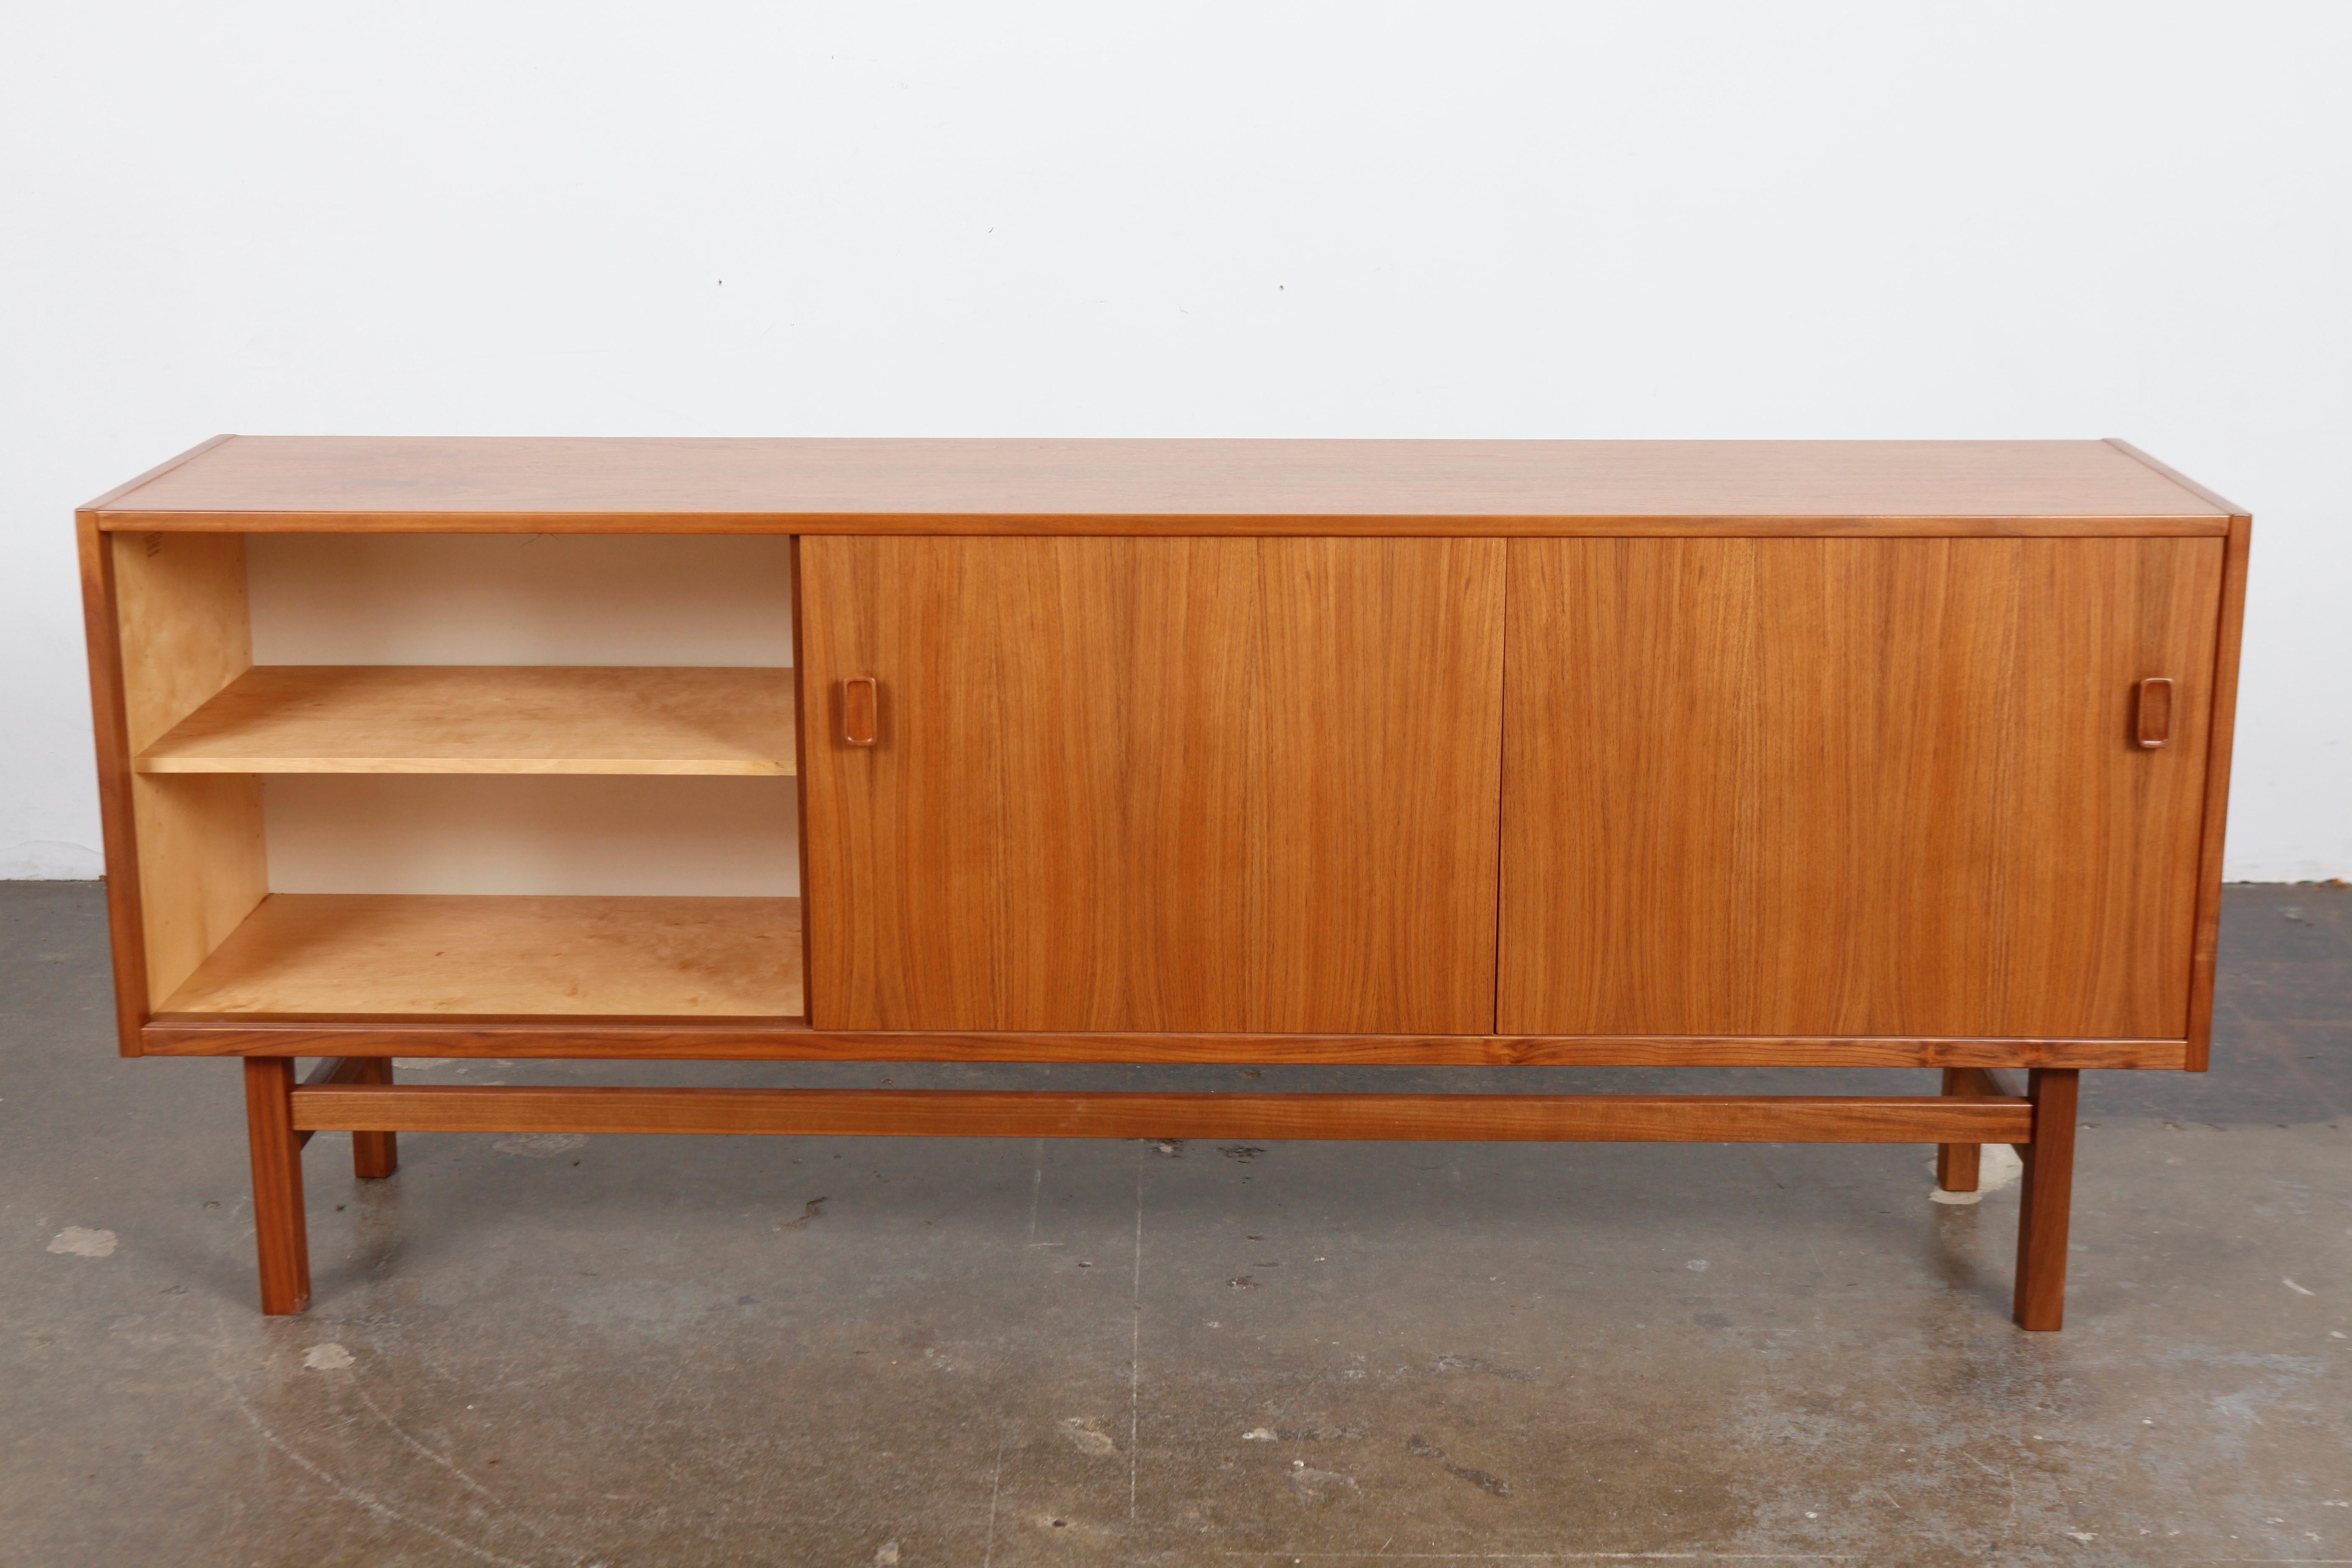 1960s walnut sideboard with two sliding doors and four center drawers, designed by Nils Jonsson for Troeds.
Model 